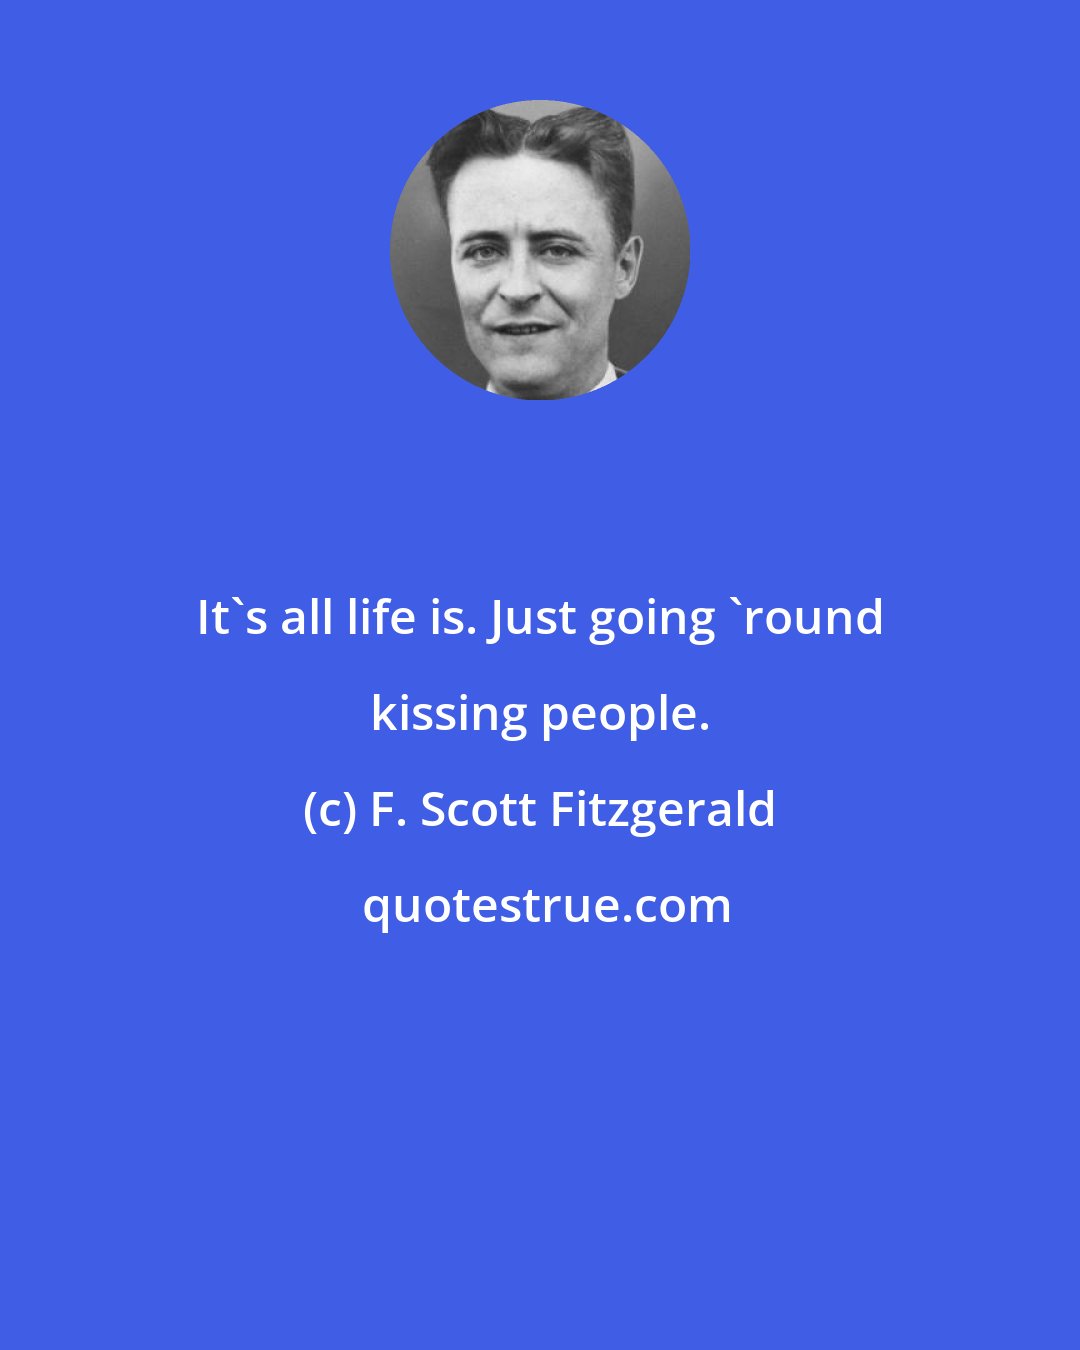 F. Scott Fitzgerald: It's all life is. Just going 'round kissing people.